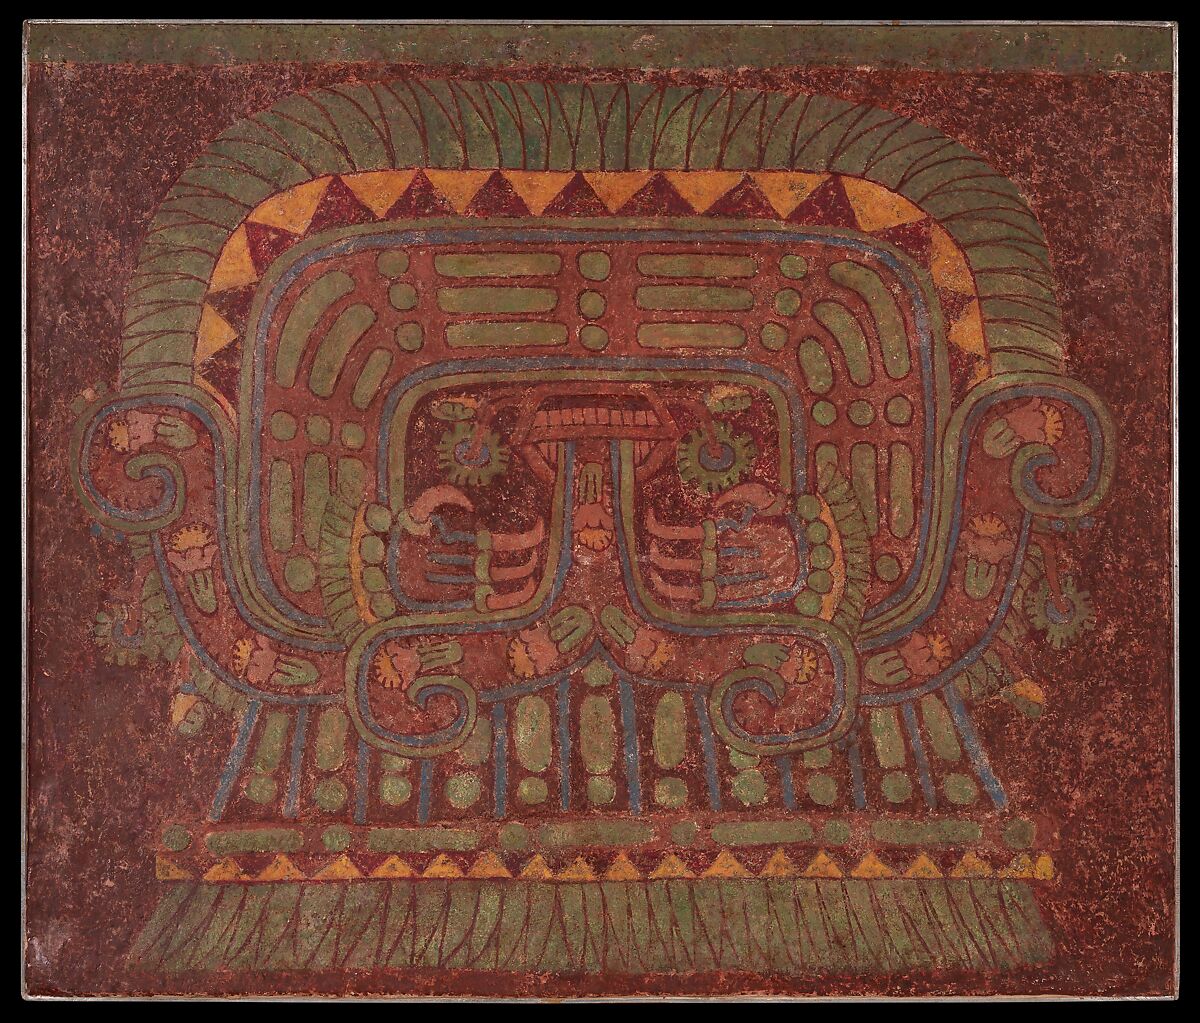 Wall Painting, Earthen aggregate, lime plaster, pigments, Teotihuacan 